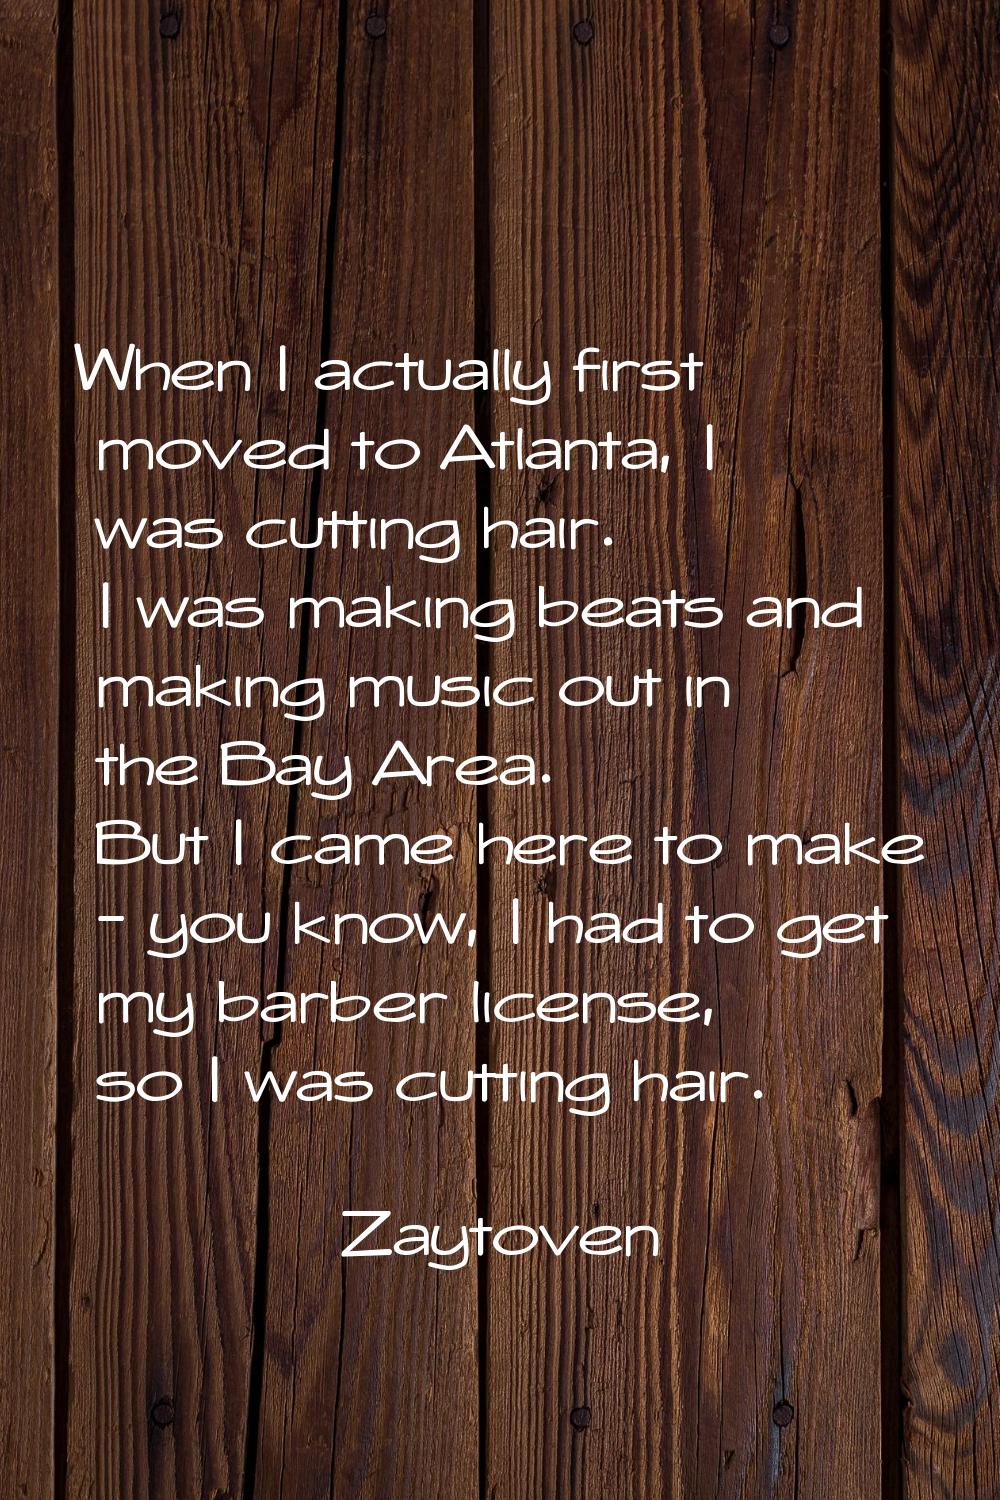 When I actually first moved to Atlanta, I was cutting hair. I was making beats and making music out